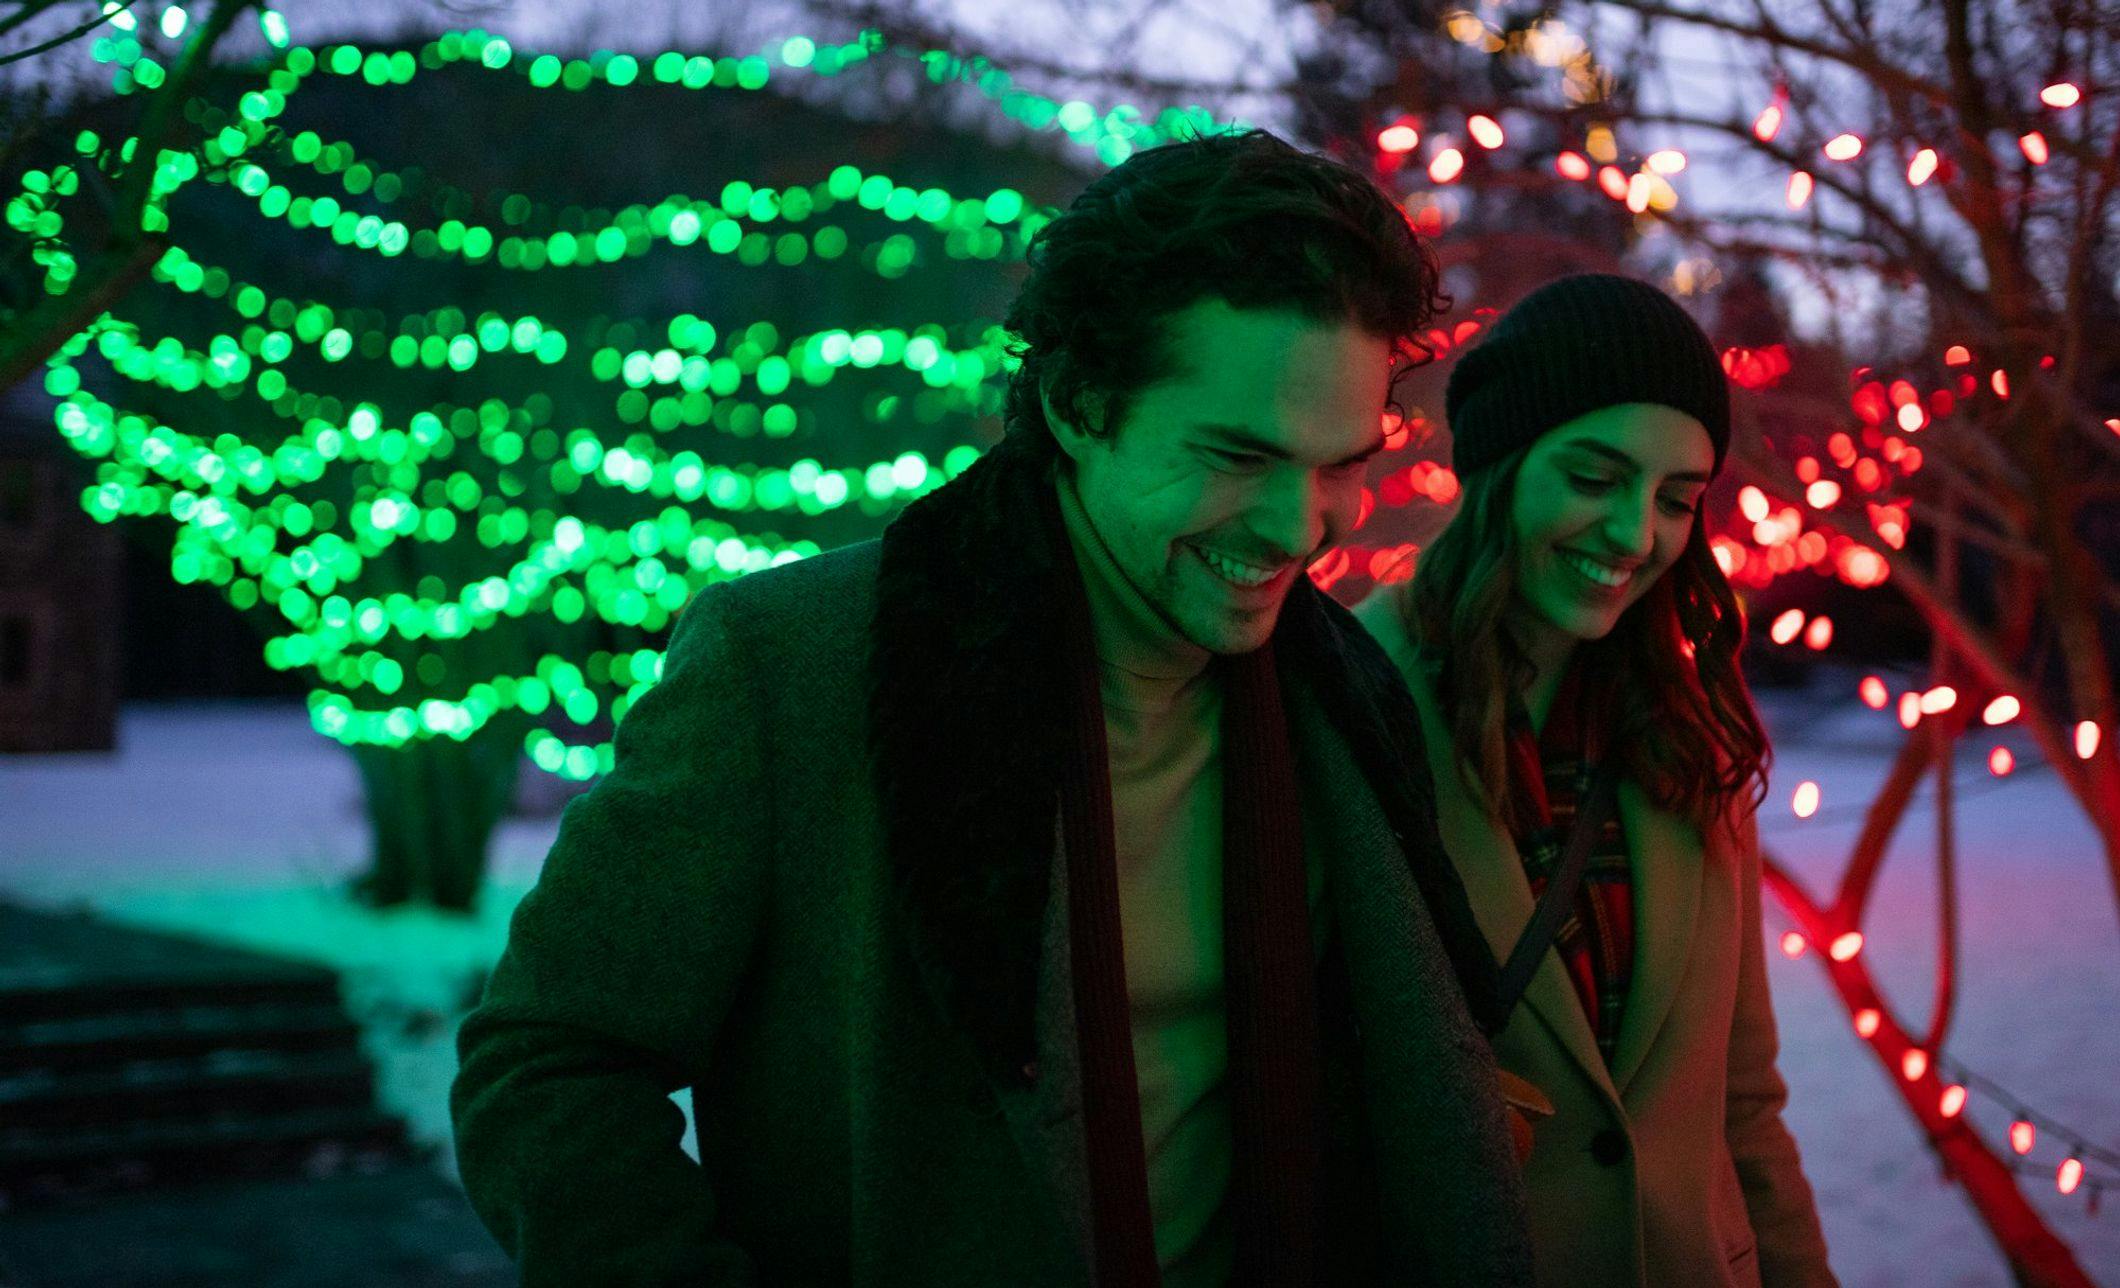 A couple enjoys an evening walk on a snowy trail surrounded by trees adorned with Christmas lights